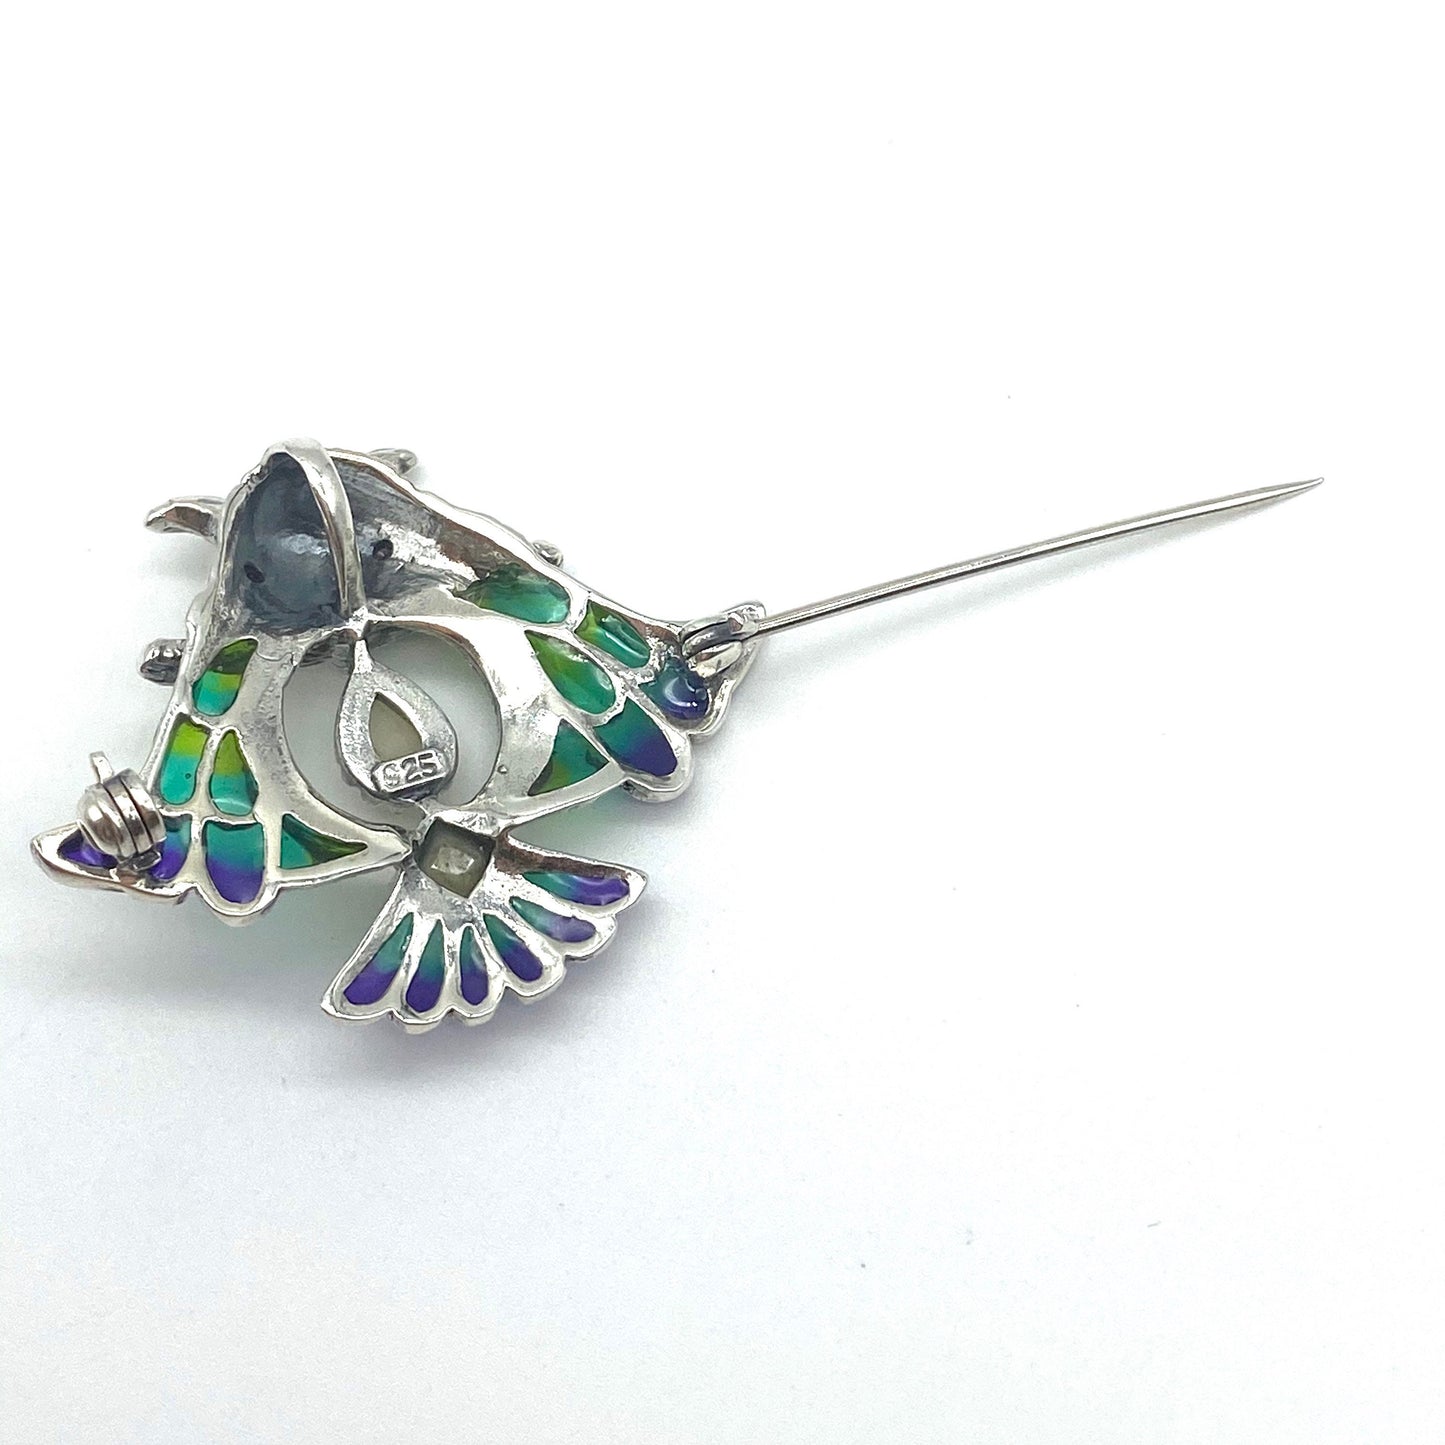 Silver Plique-à-jour Owl Brooch / Pendant with genuine Ruby Eyes, Crystal Opal Tummy and a Mother of Pearl Tail